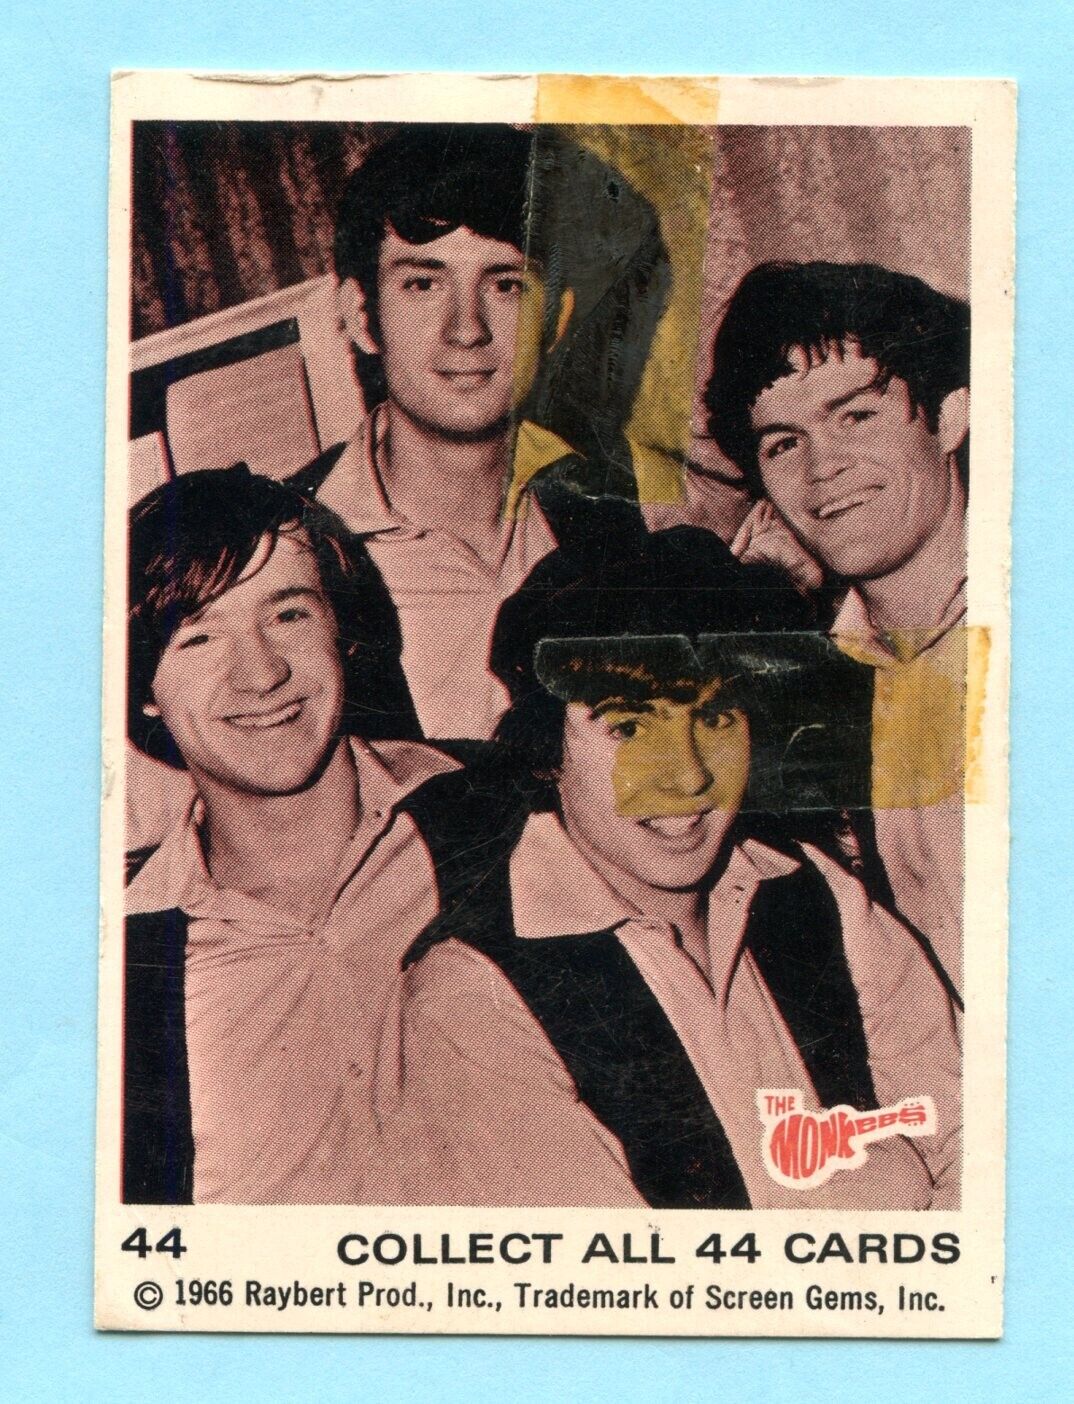 Vintage Monkees Trading Cards - Raybert Prod. 1966 - Card #44